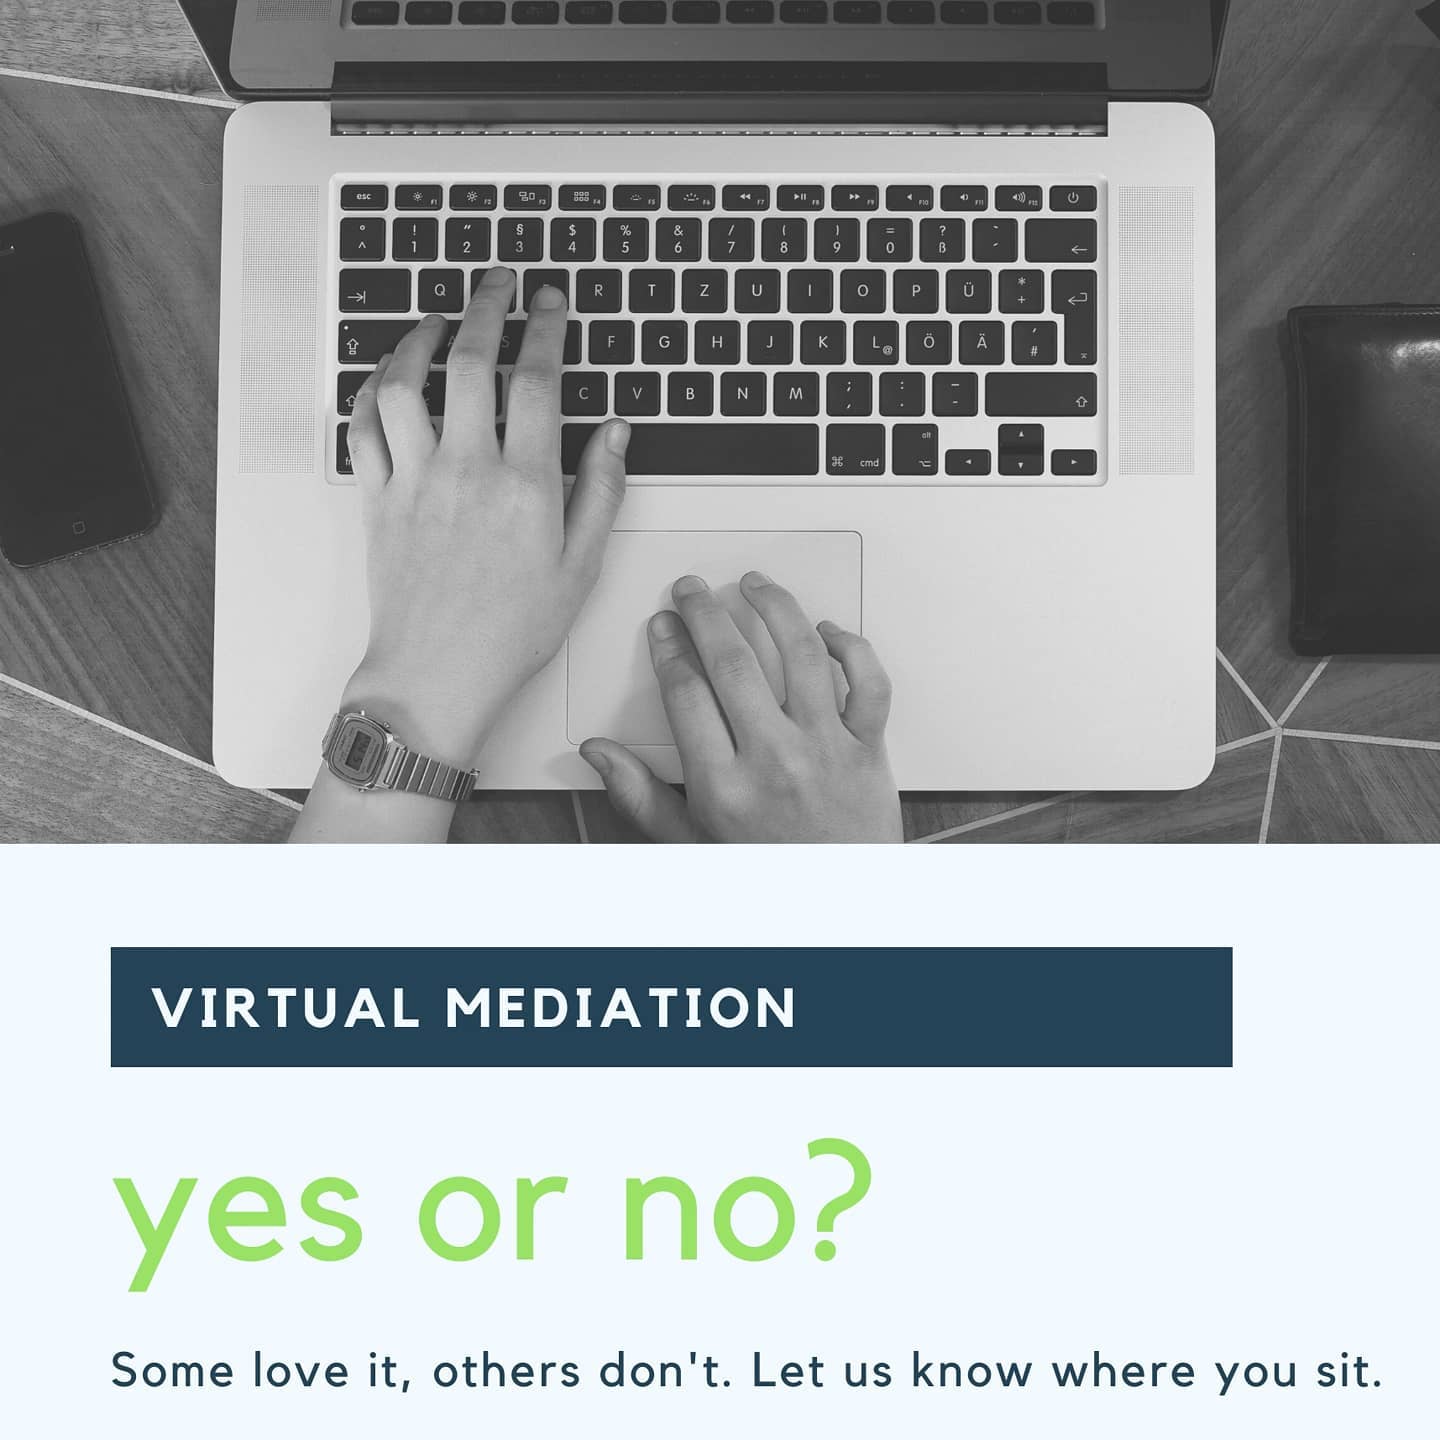 Virtual Mediation - Yes or No? Some love it others don't. Let us know where you sit.